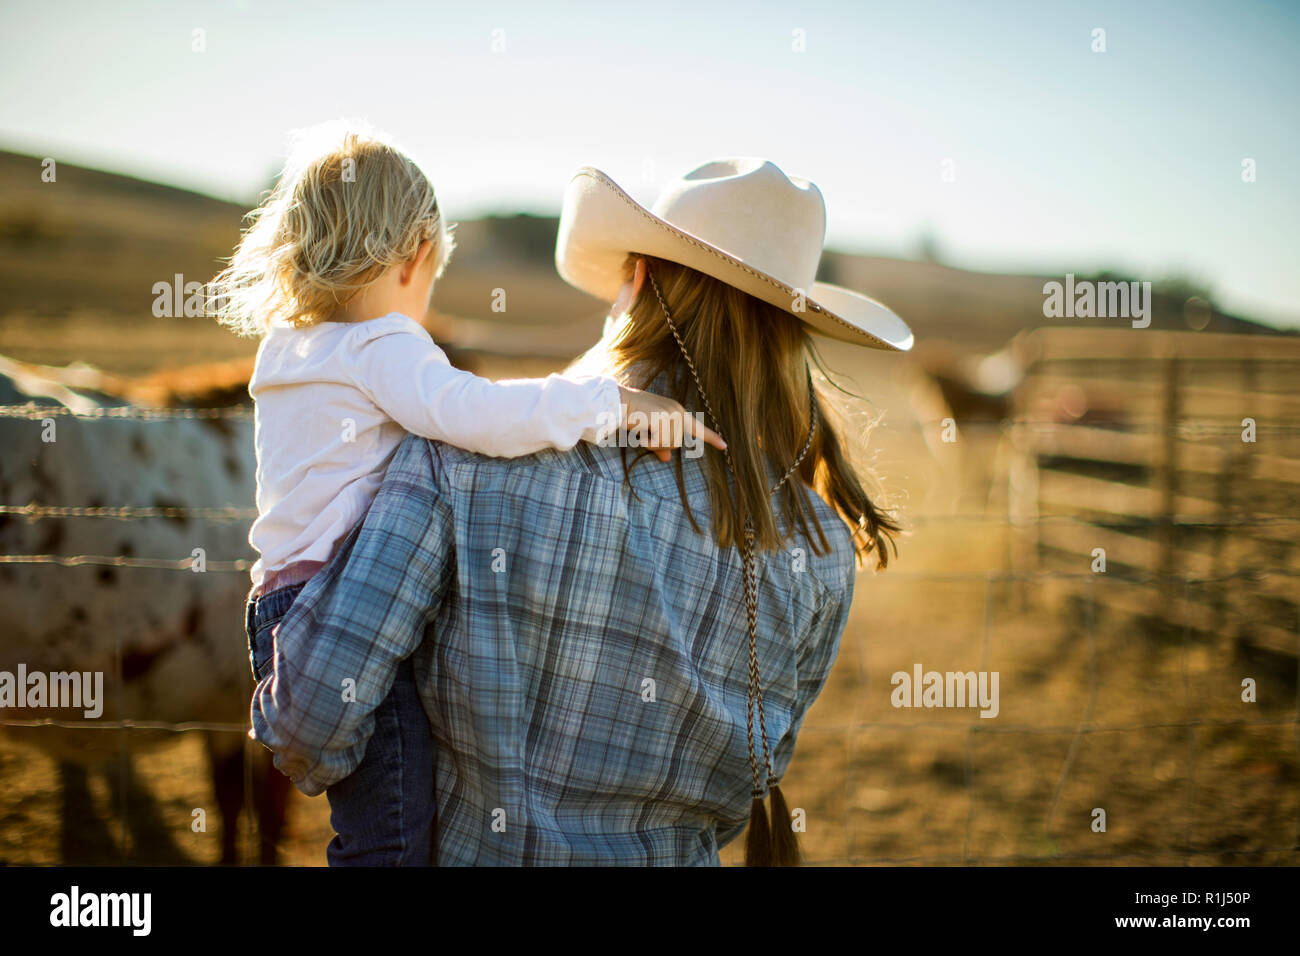 Farmer's toddler out and about on the ranch. Stock Photo